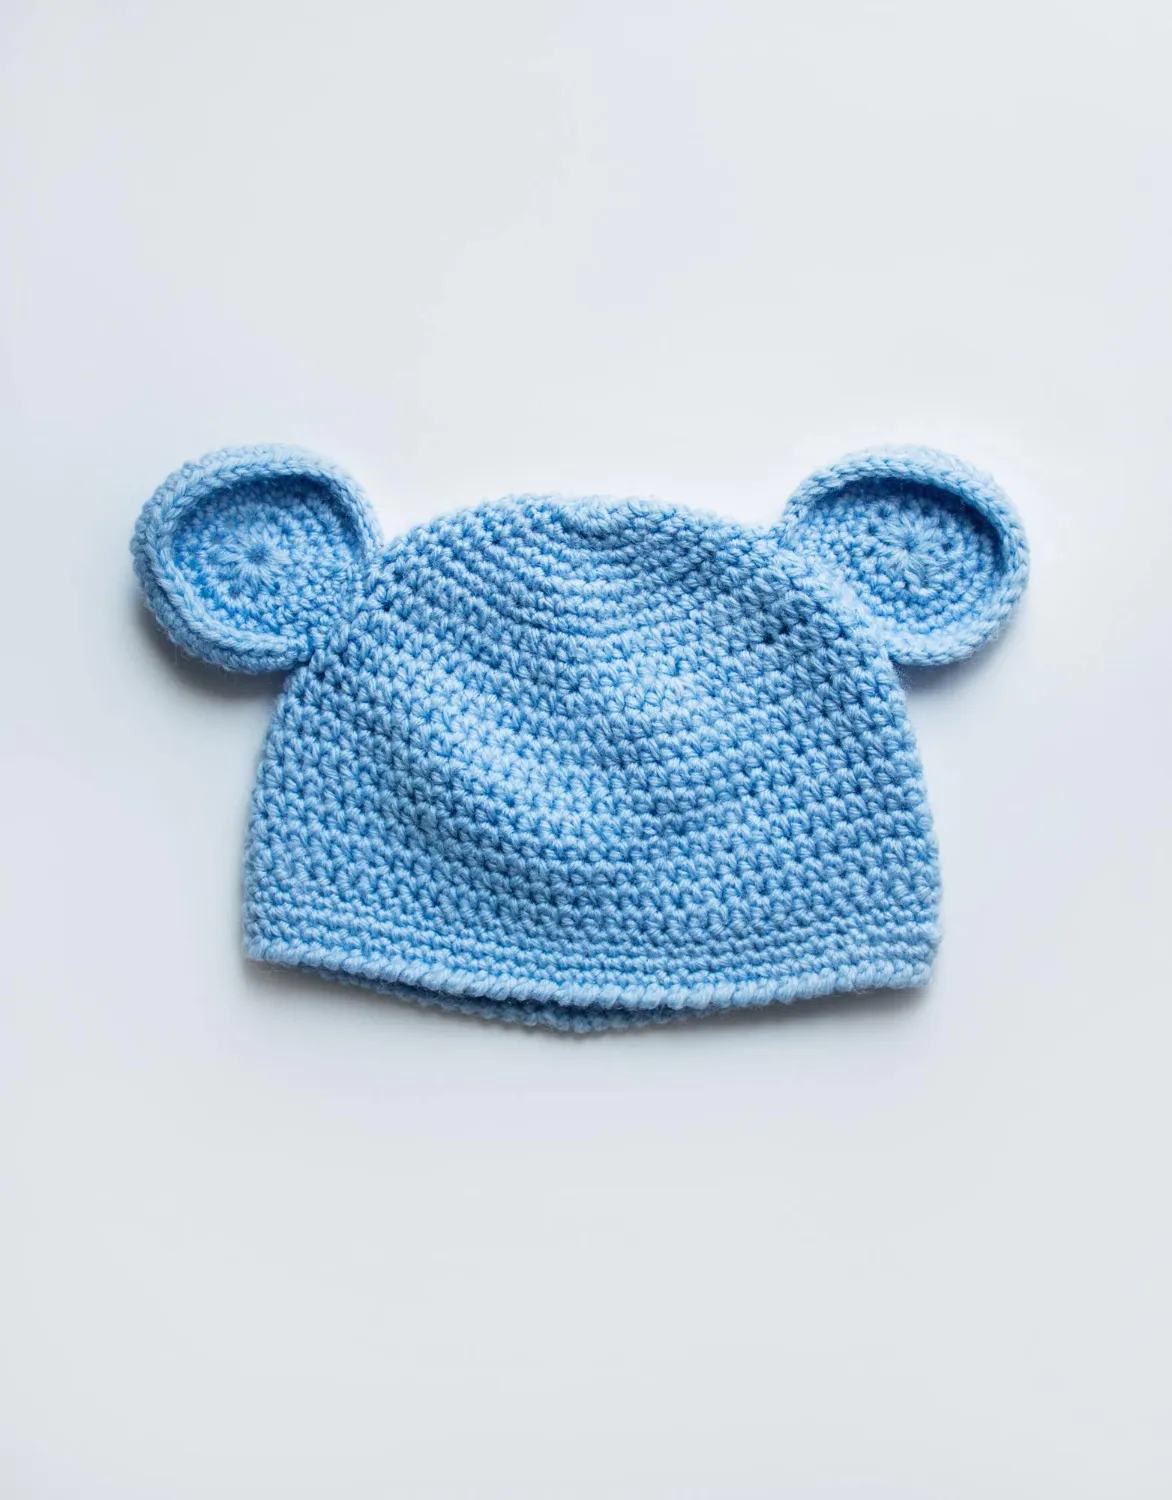 Blue hat of a newborn baby isolated on a white background children's clothing